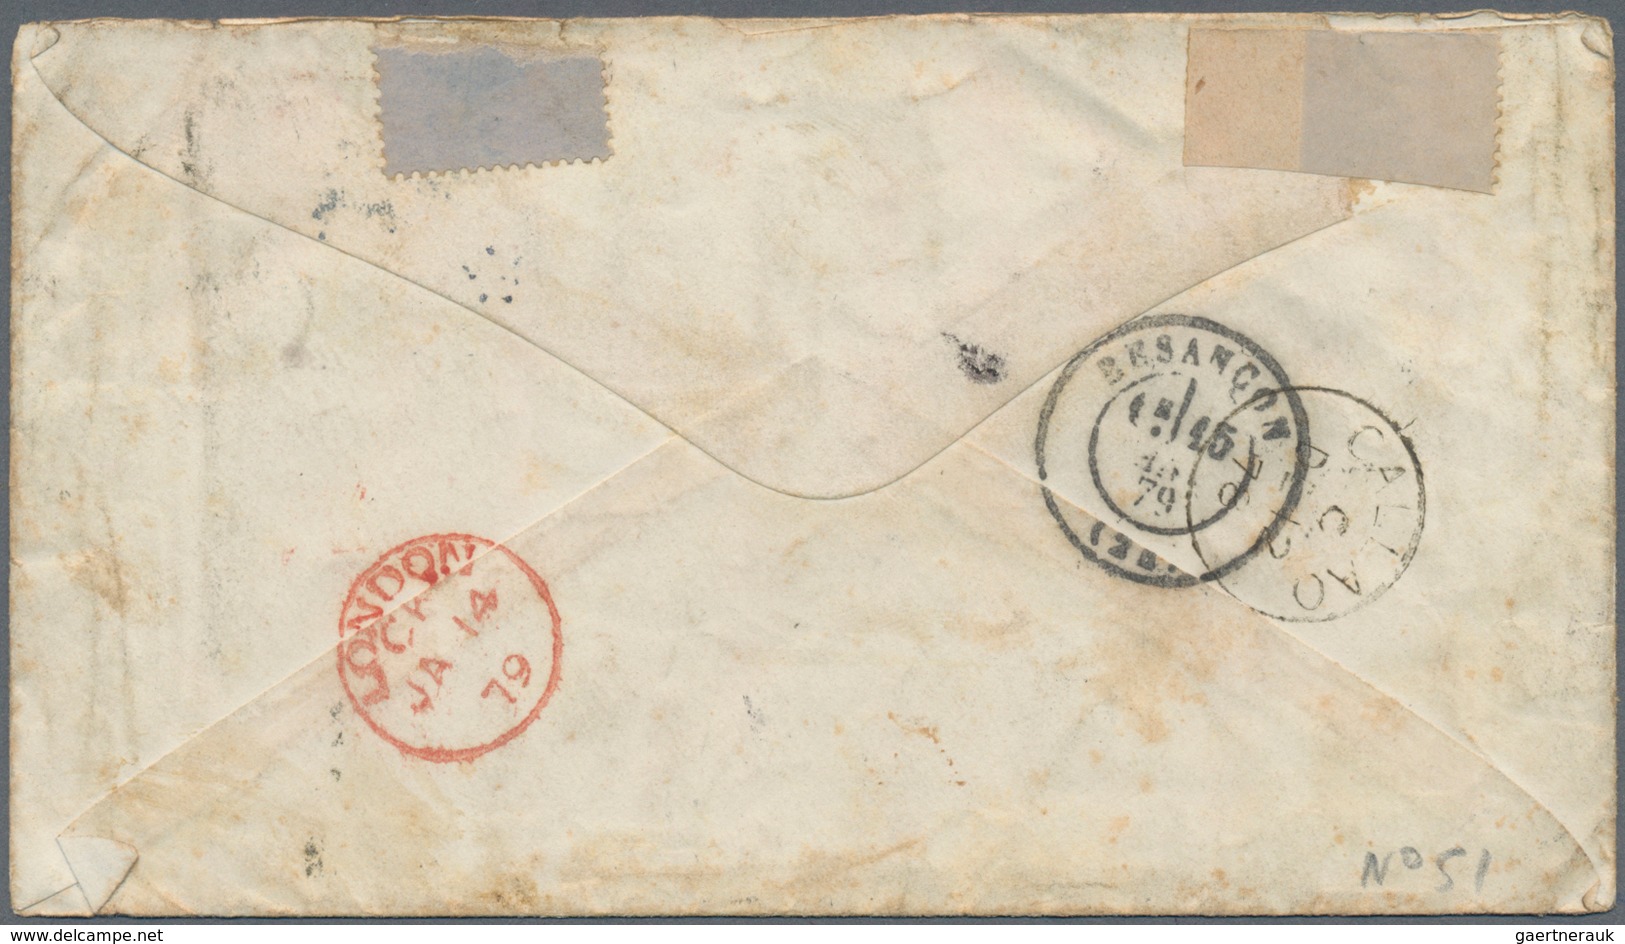 Peru: 1878, Postal Stationery Envelope 10c. Red Used From The British Post Office In CALLAO, Peru To - Peru